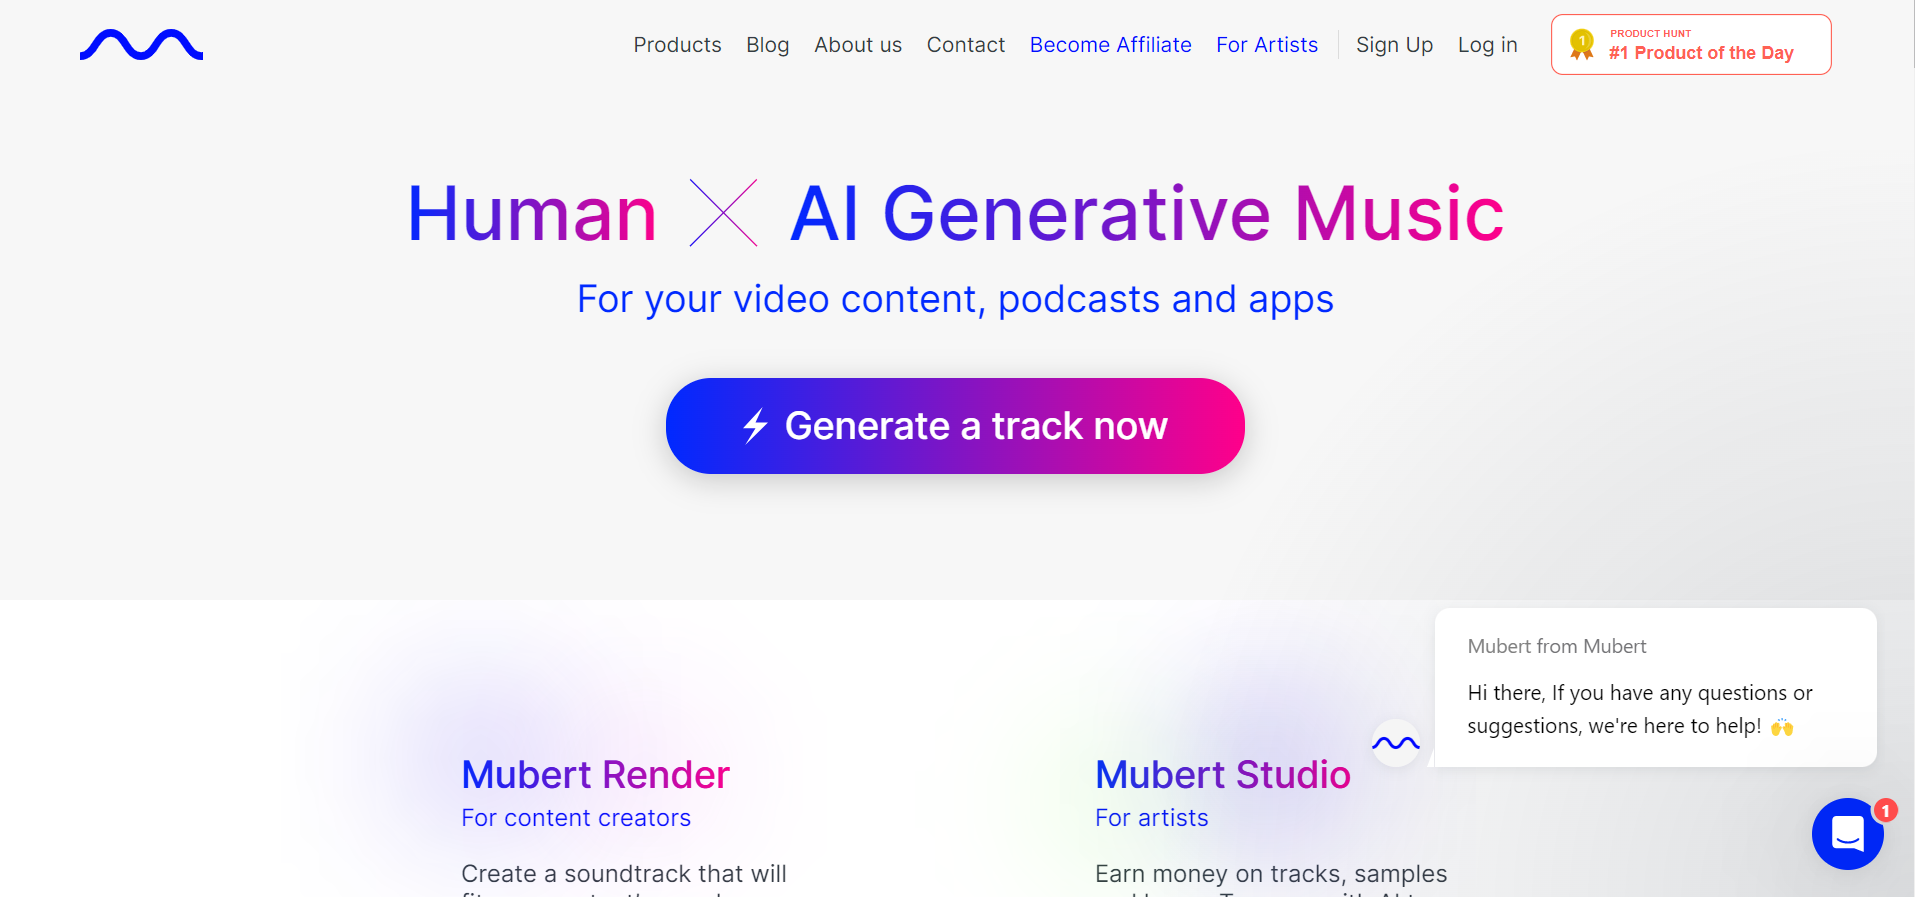 Transform Your Content with Mubert.com’s High-Quality Royalty-Free Music Ecosystem!